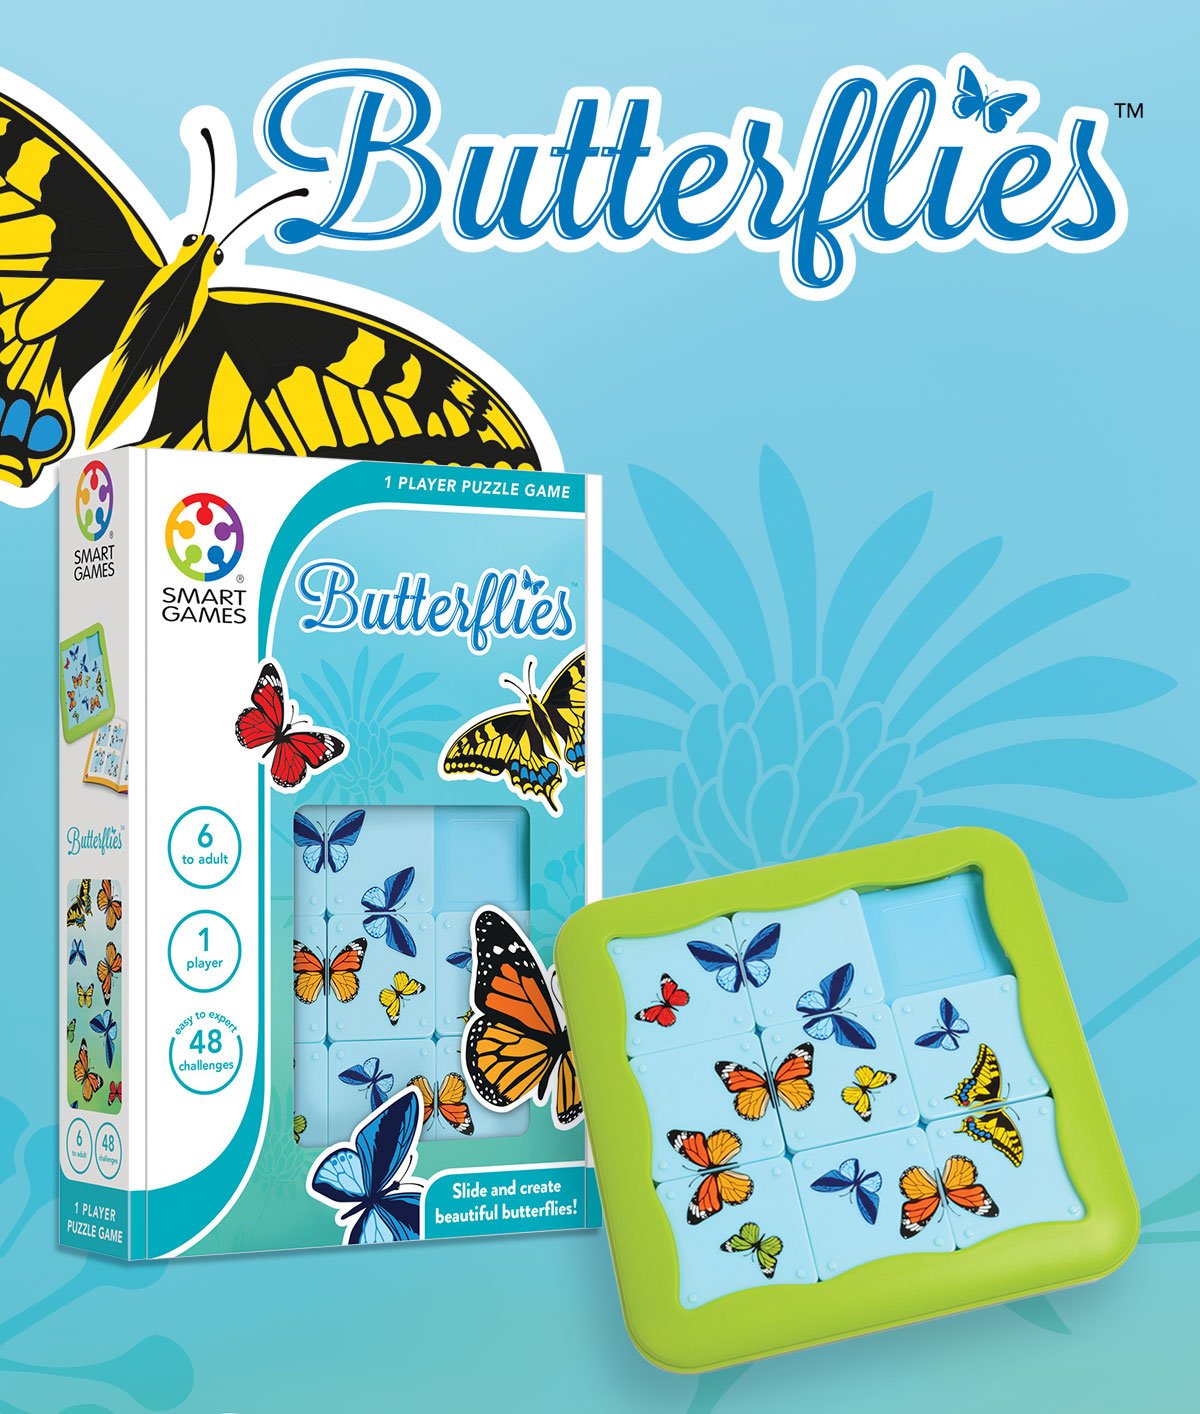 Smart Games - Butterflies (1 Player Puzzle Game)